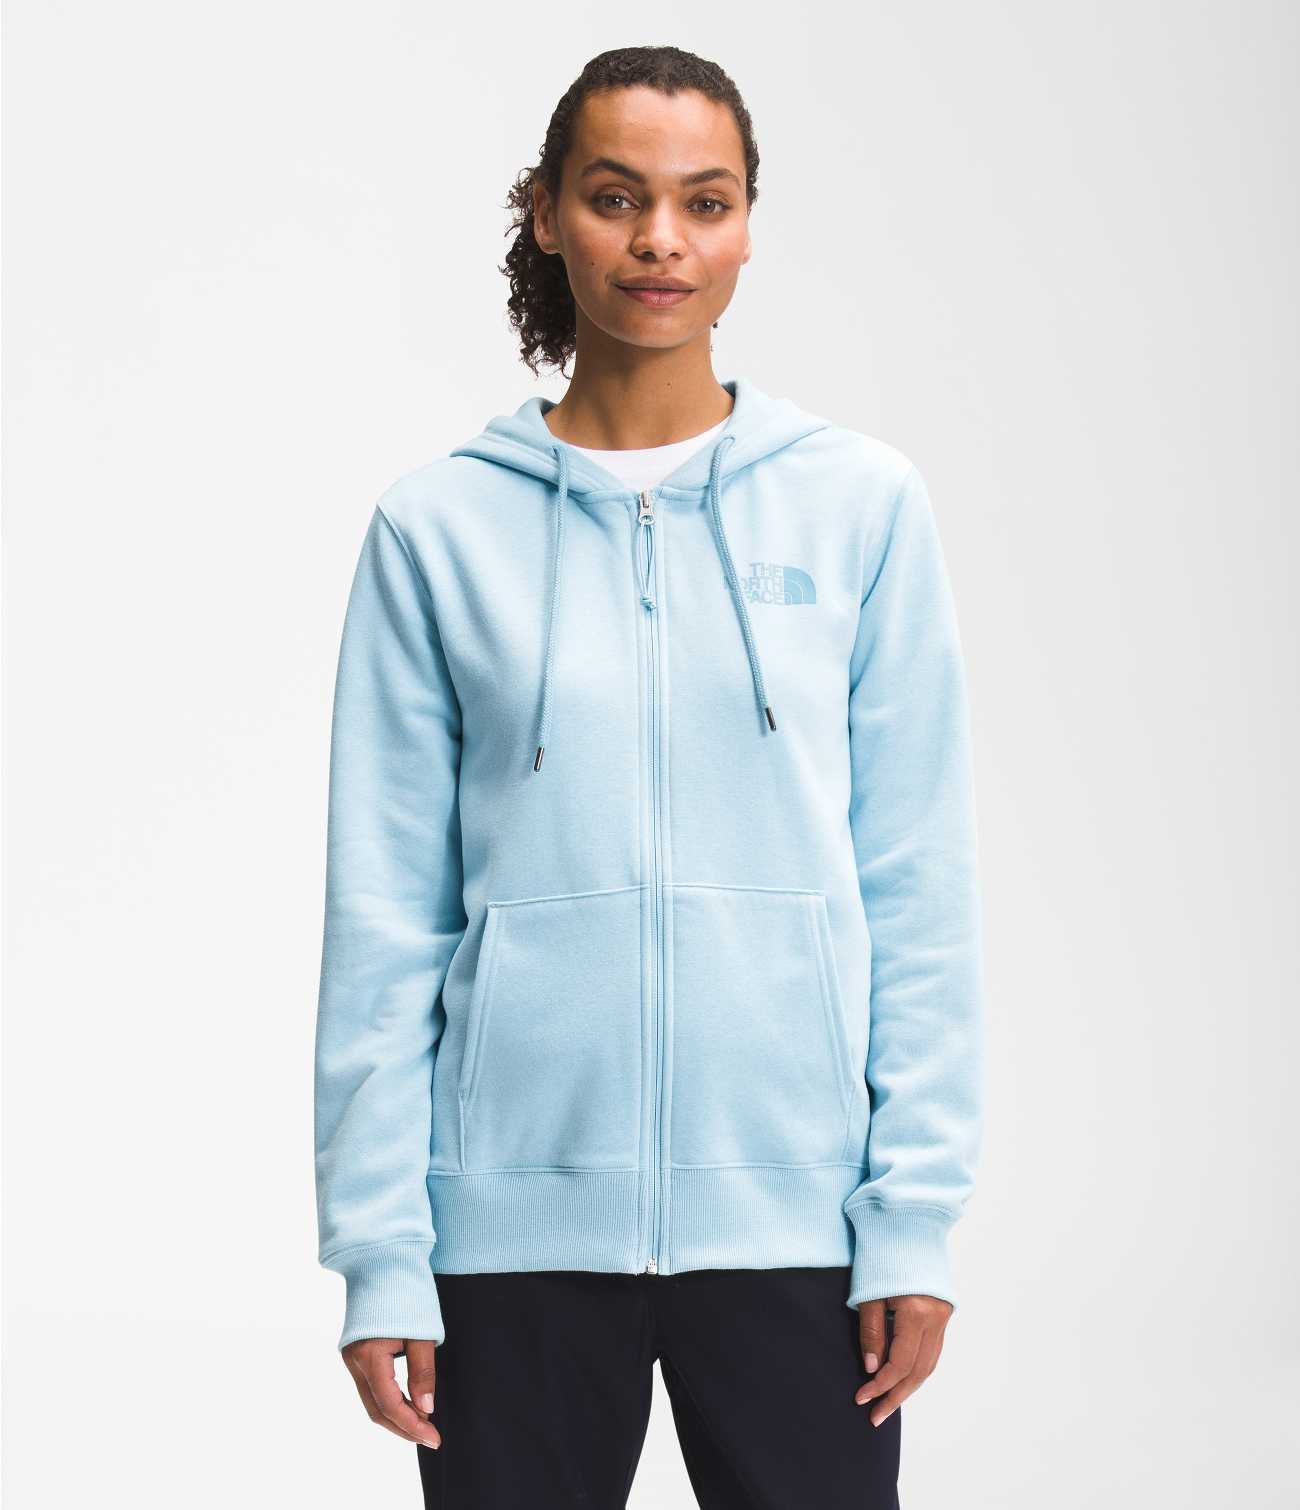 WOMEN'S HALF DOME FULL ZIP HOODIE | The North Face | The North